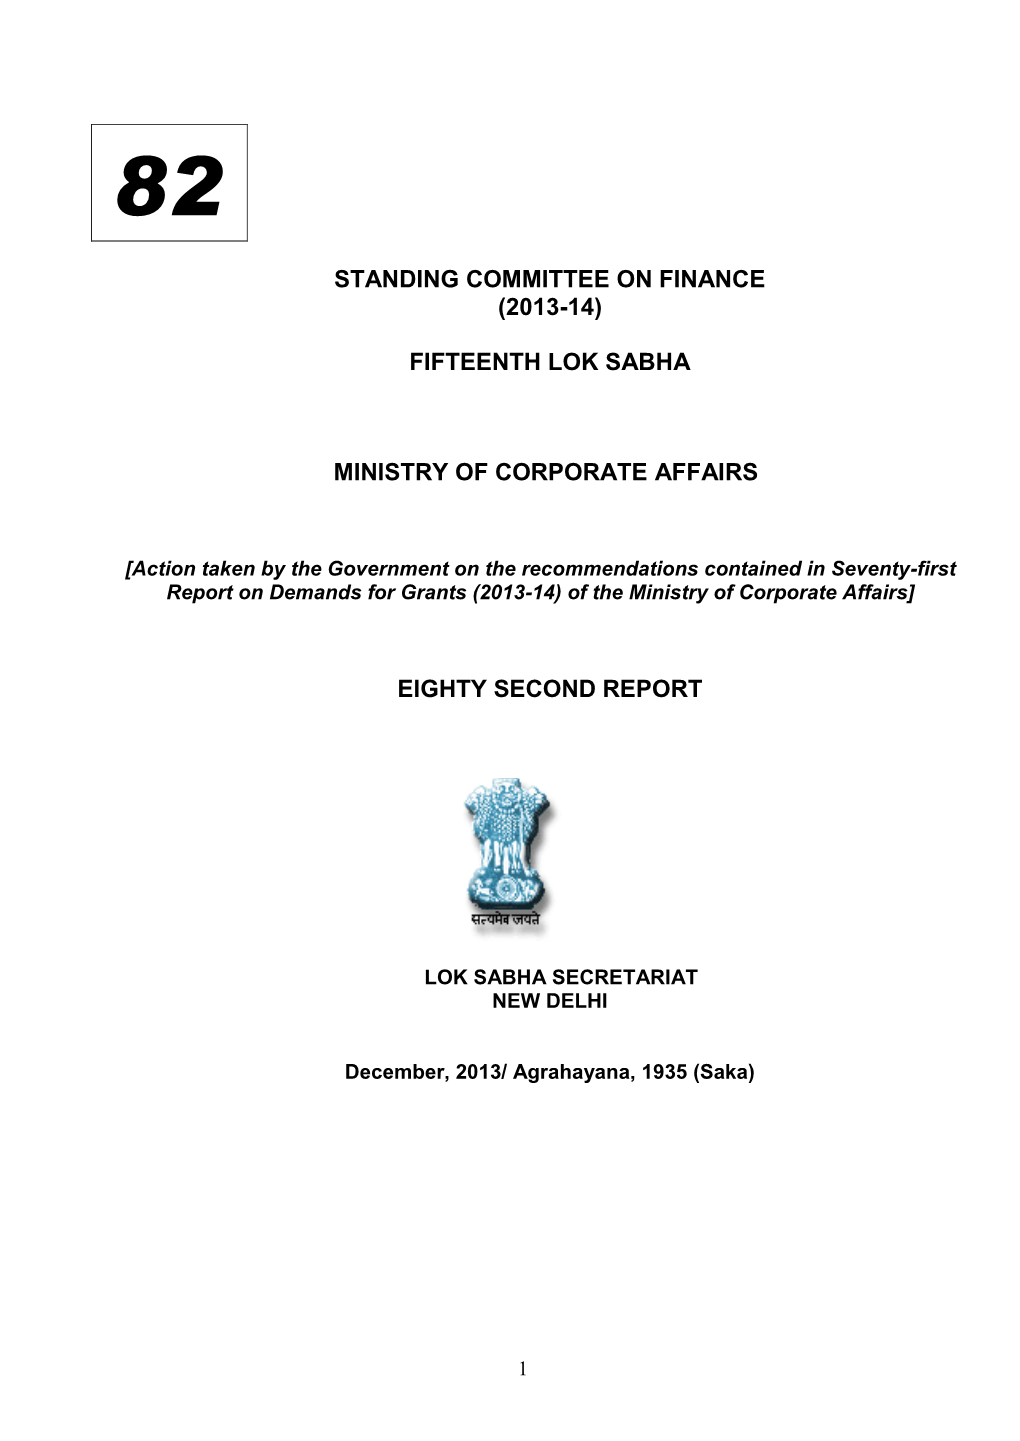 Standing Committee on Finance (2013-14) Fifteenth